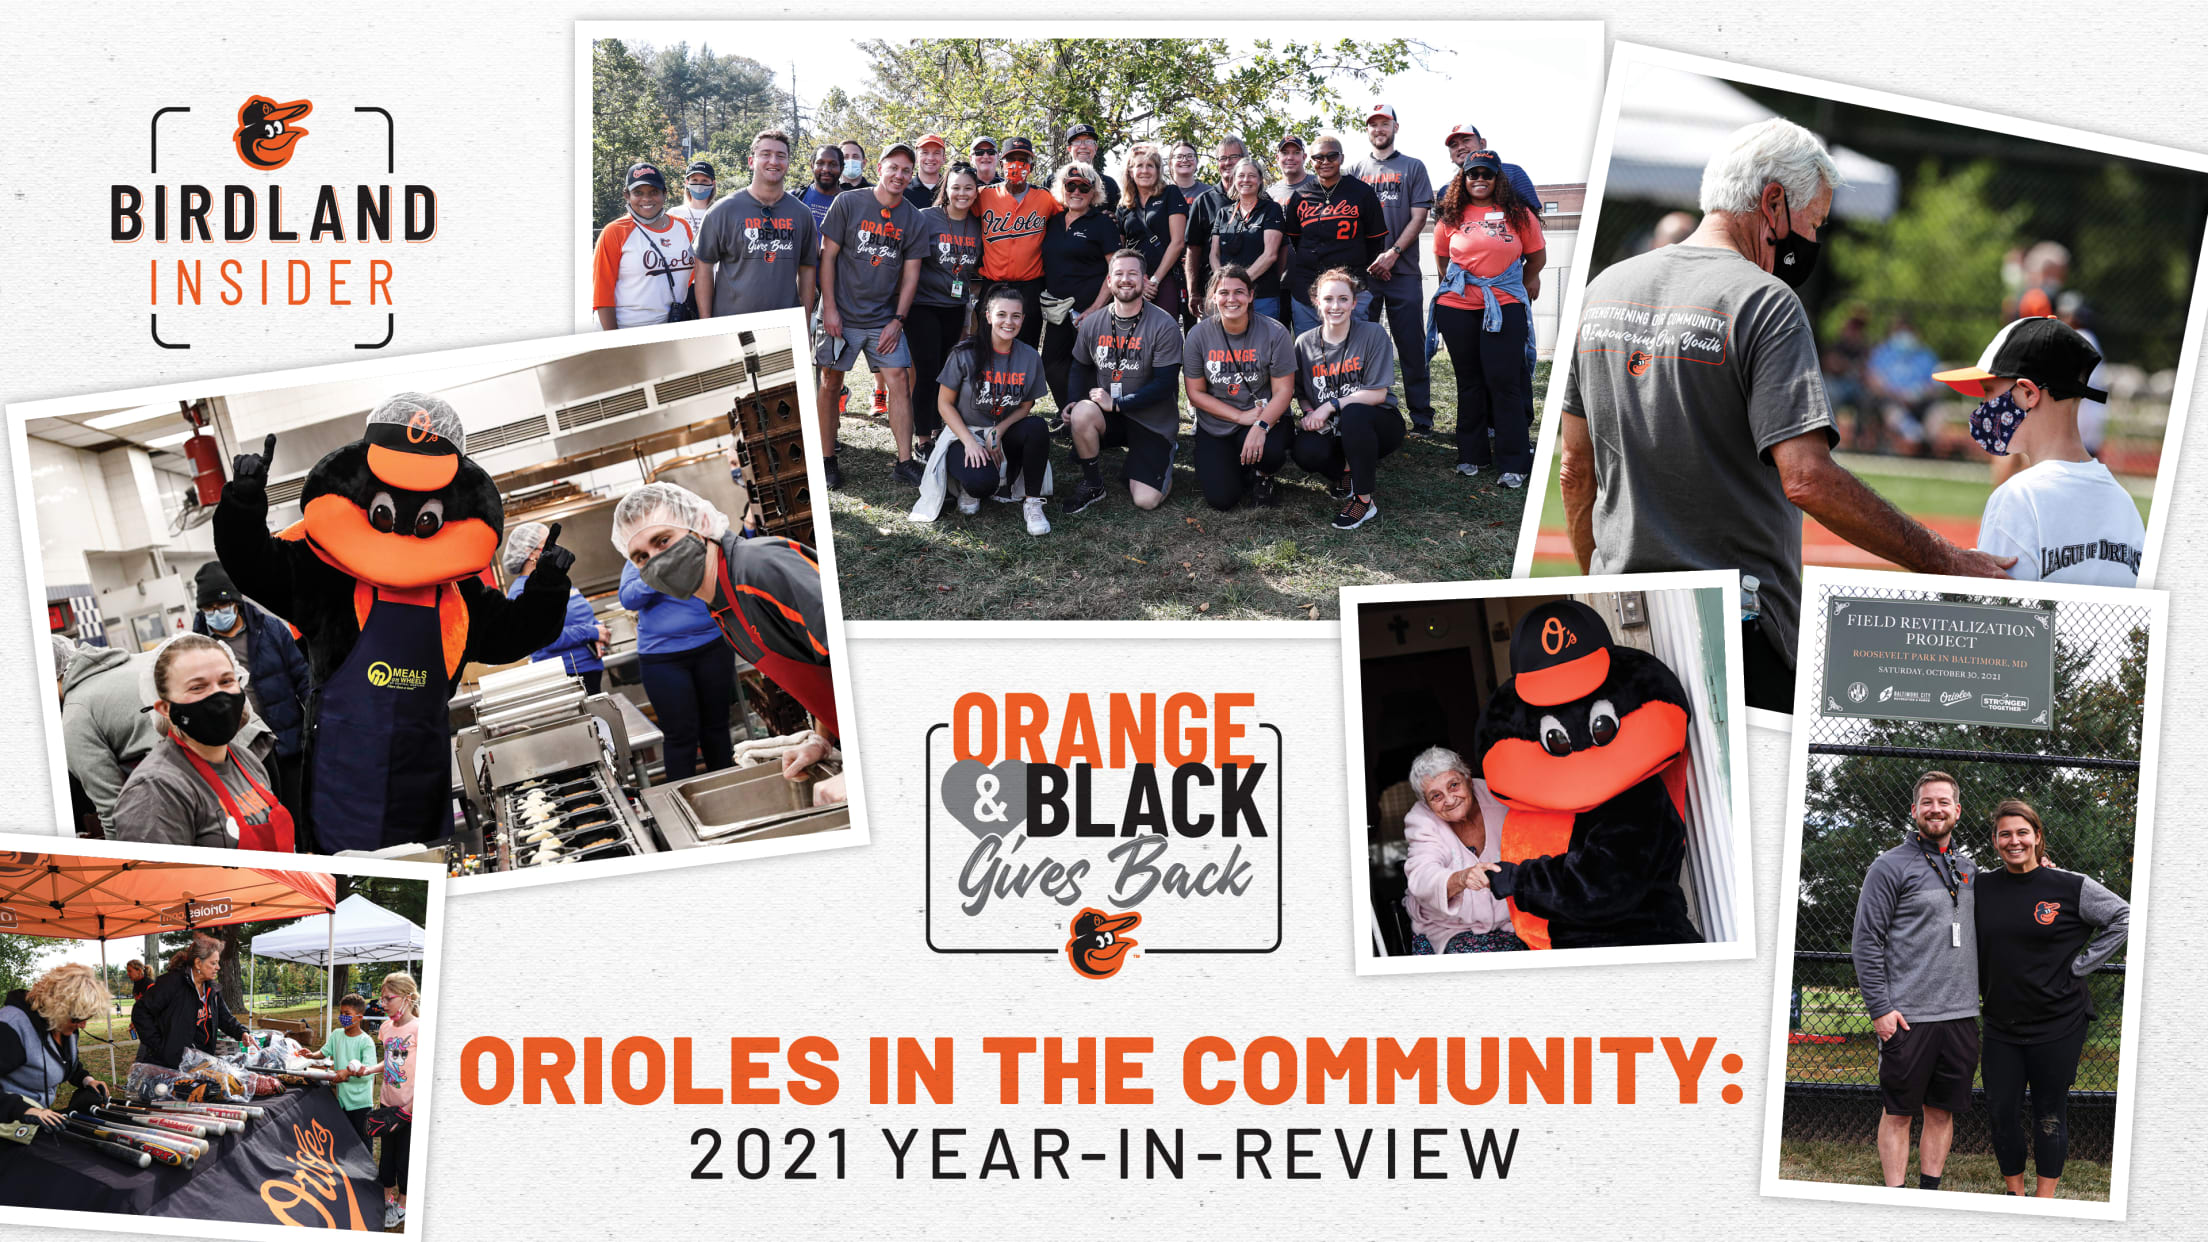 bal-orange-and-black-give-back-year-in-review-header